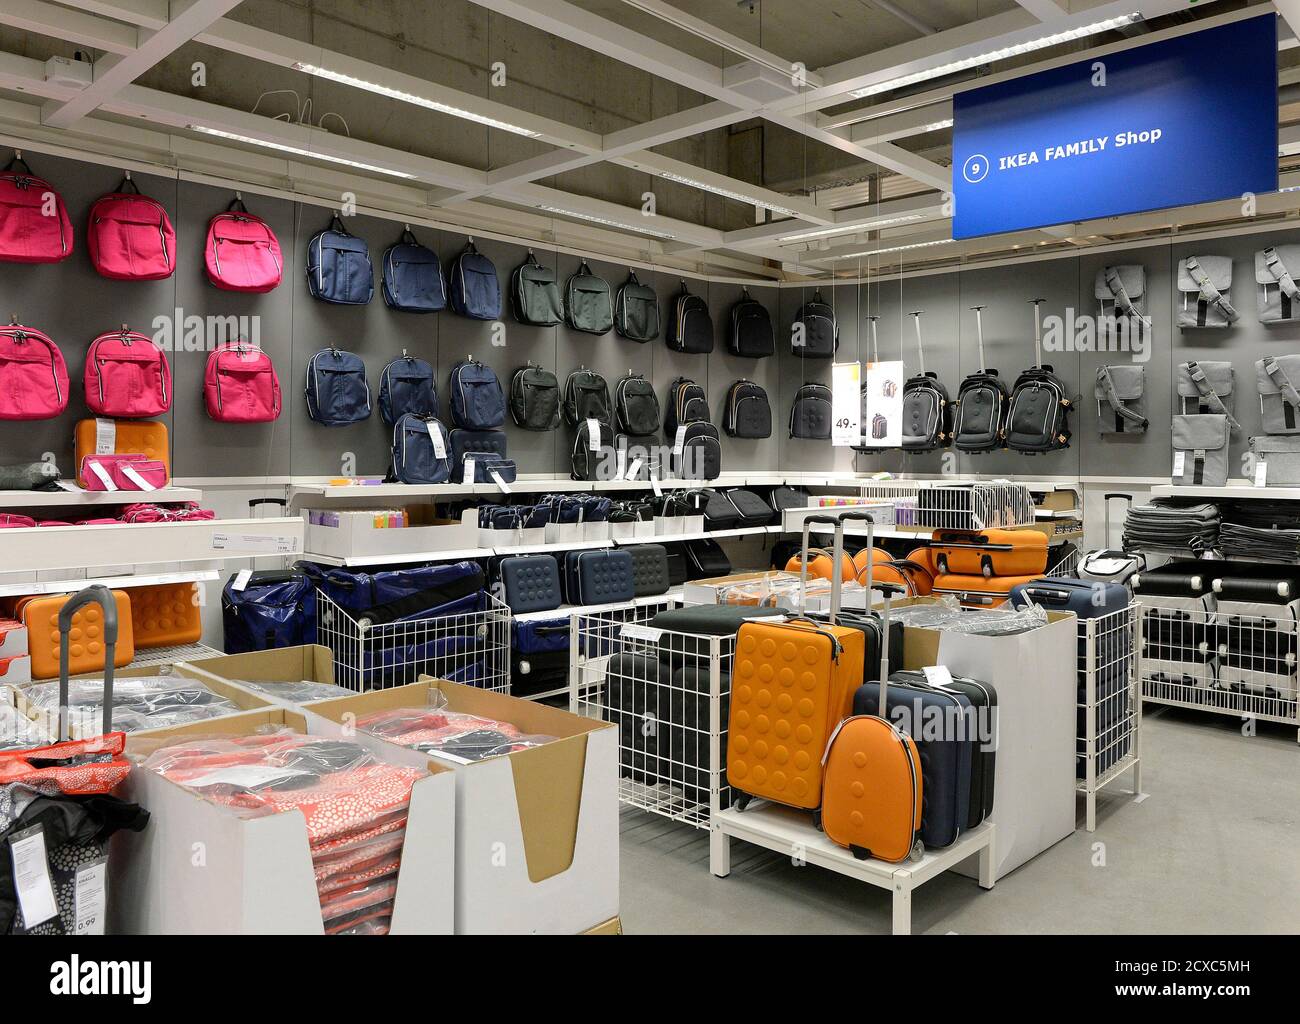 An IKEA Family section is pictured in IKEA's first city centre store in  Hamburg June 25, 2014. Sweden's IKEA, the world's biggest furniture chain  known for its sprawling out-of-town showrooms, is opening